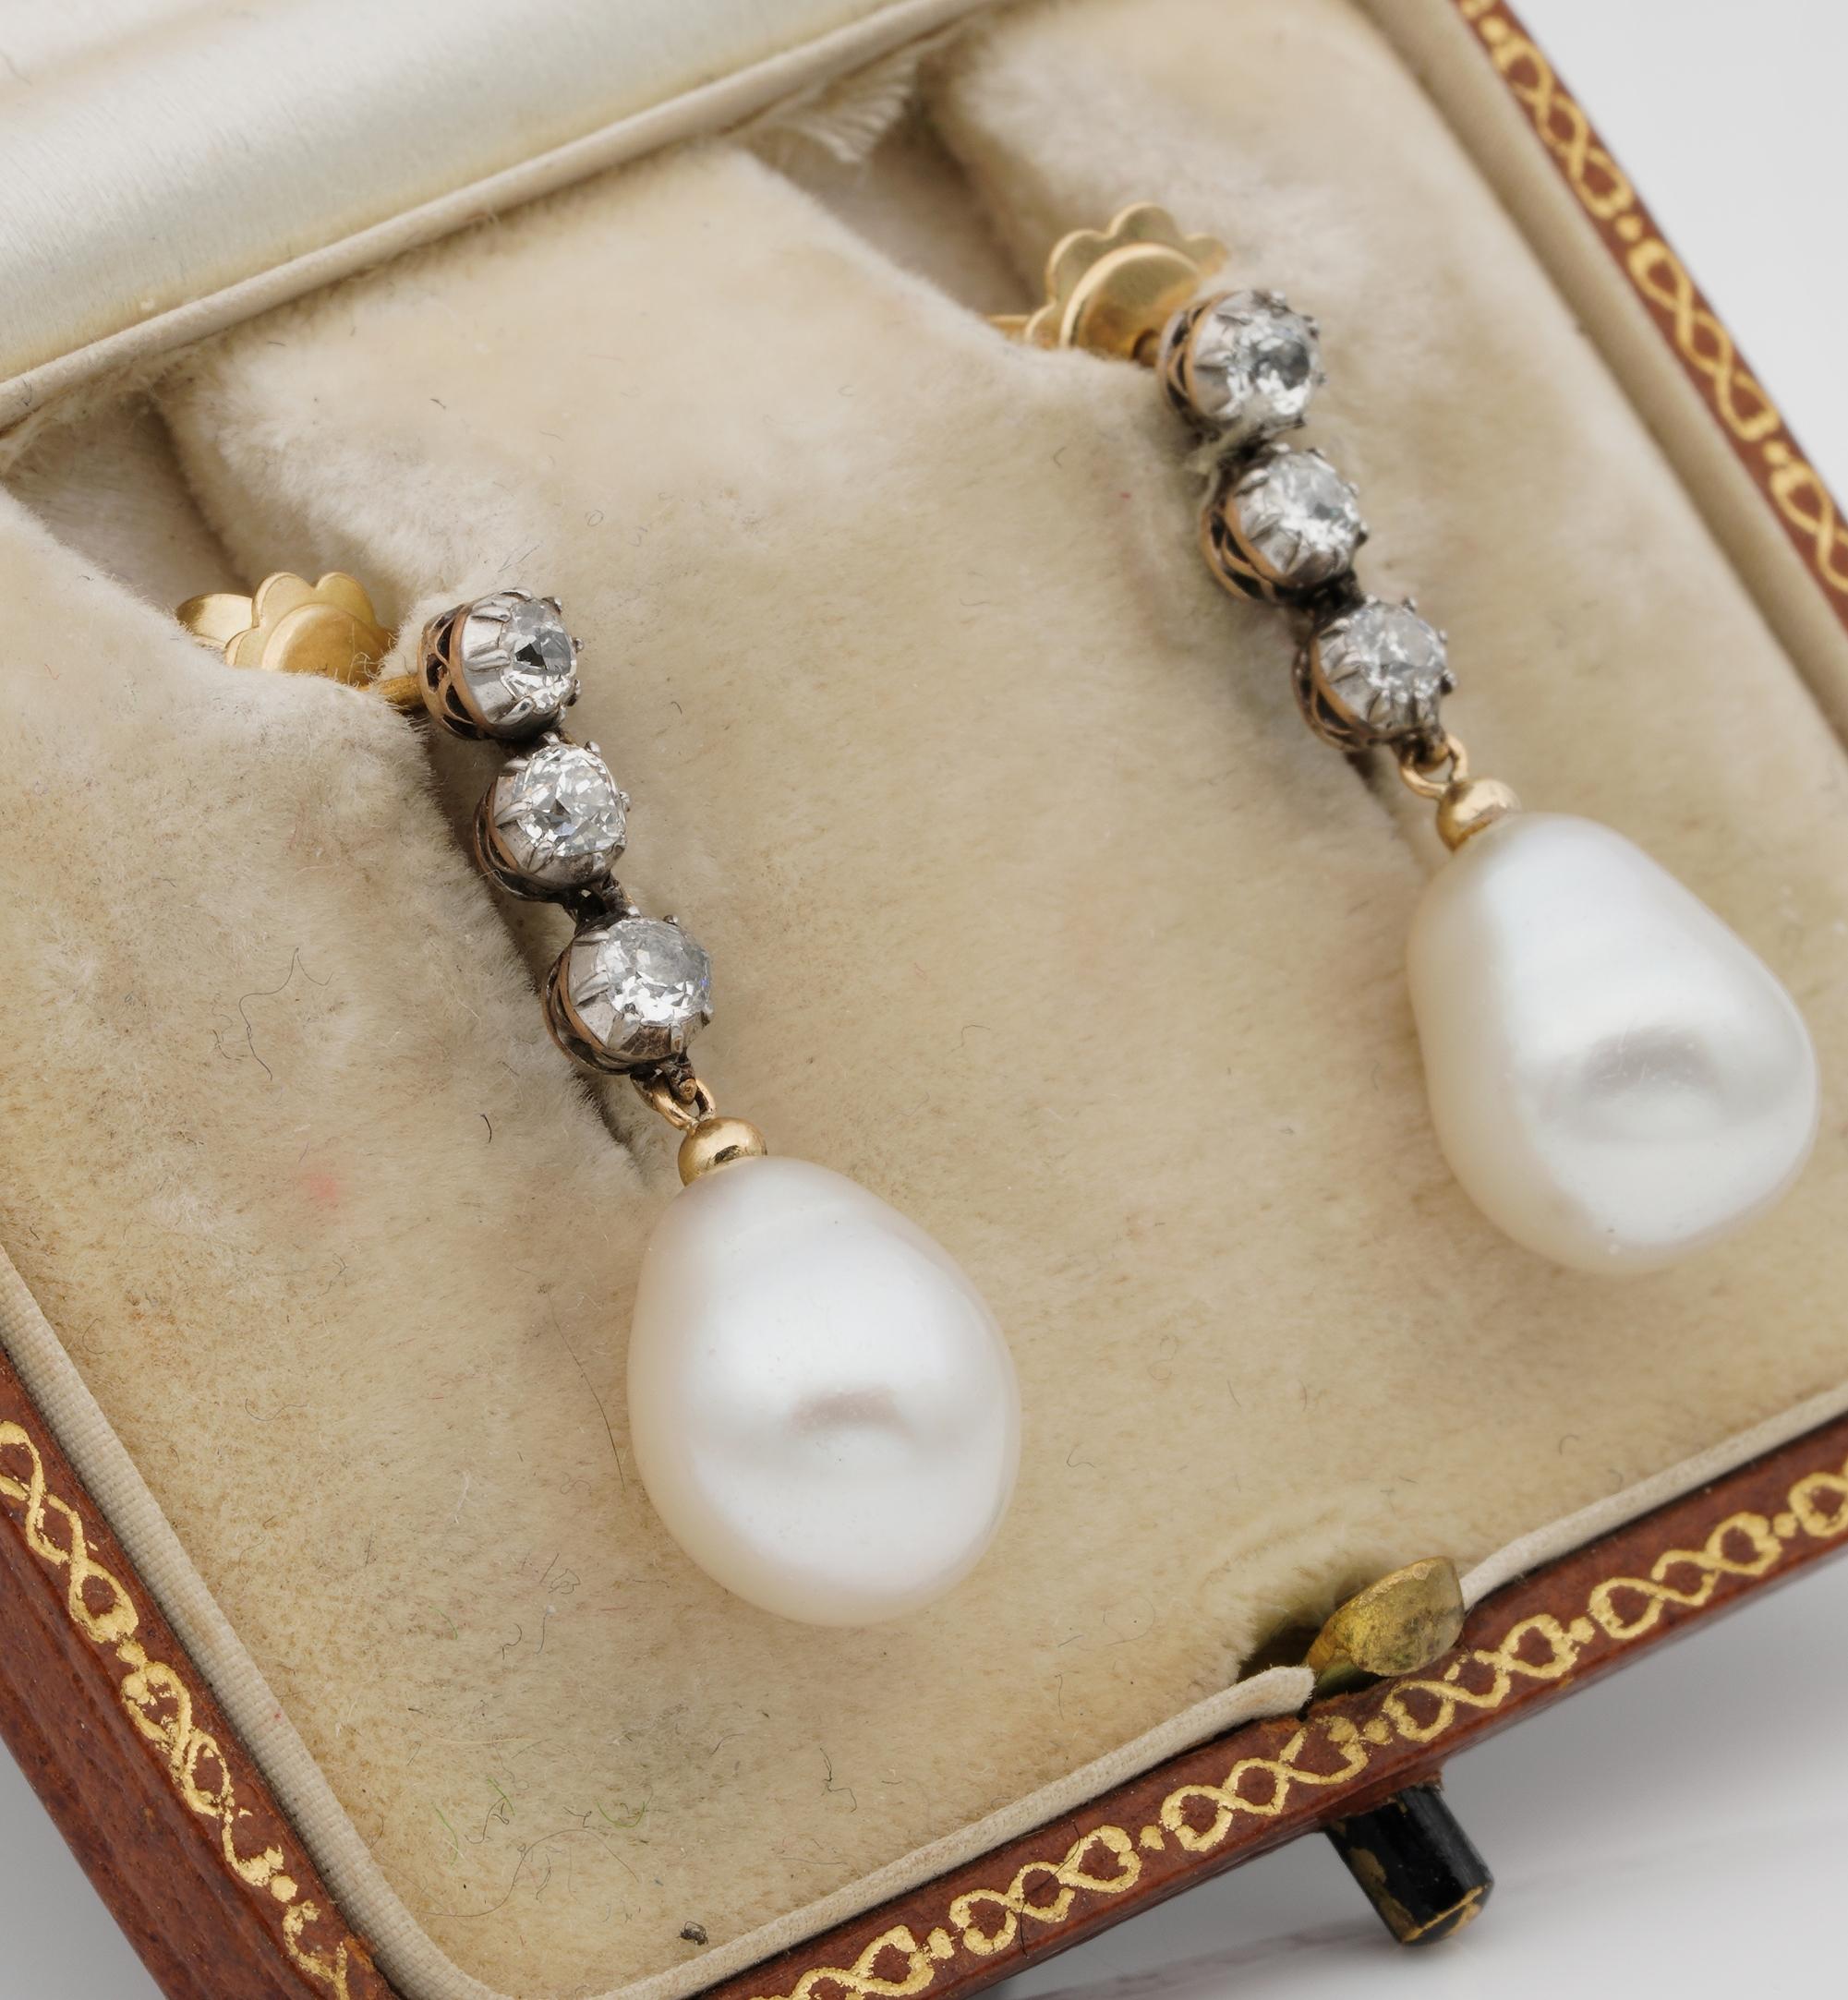 Exquisite Shimmer

Lovely find from the Victorian period made of solid 18 Kt gold topped by silver hanging a large pair of antique cultured pearls of extraordinary lustre
The diamond line comprises three Diamonds on each earring – old mine cut for a